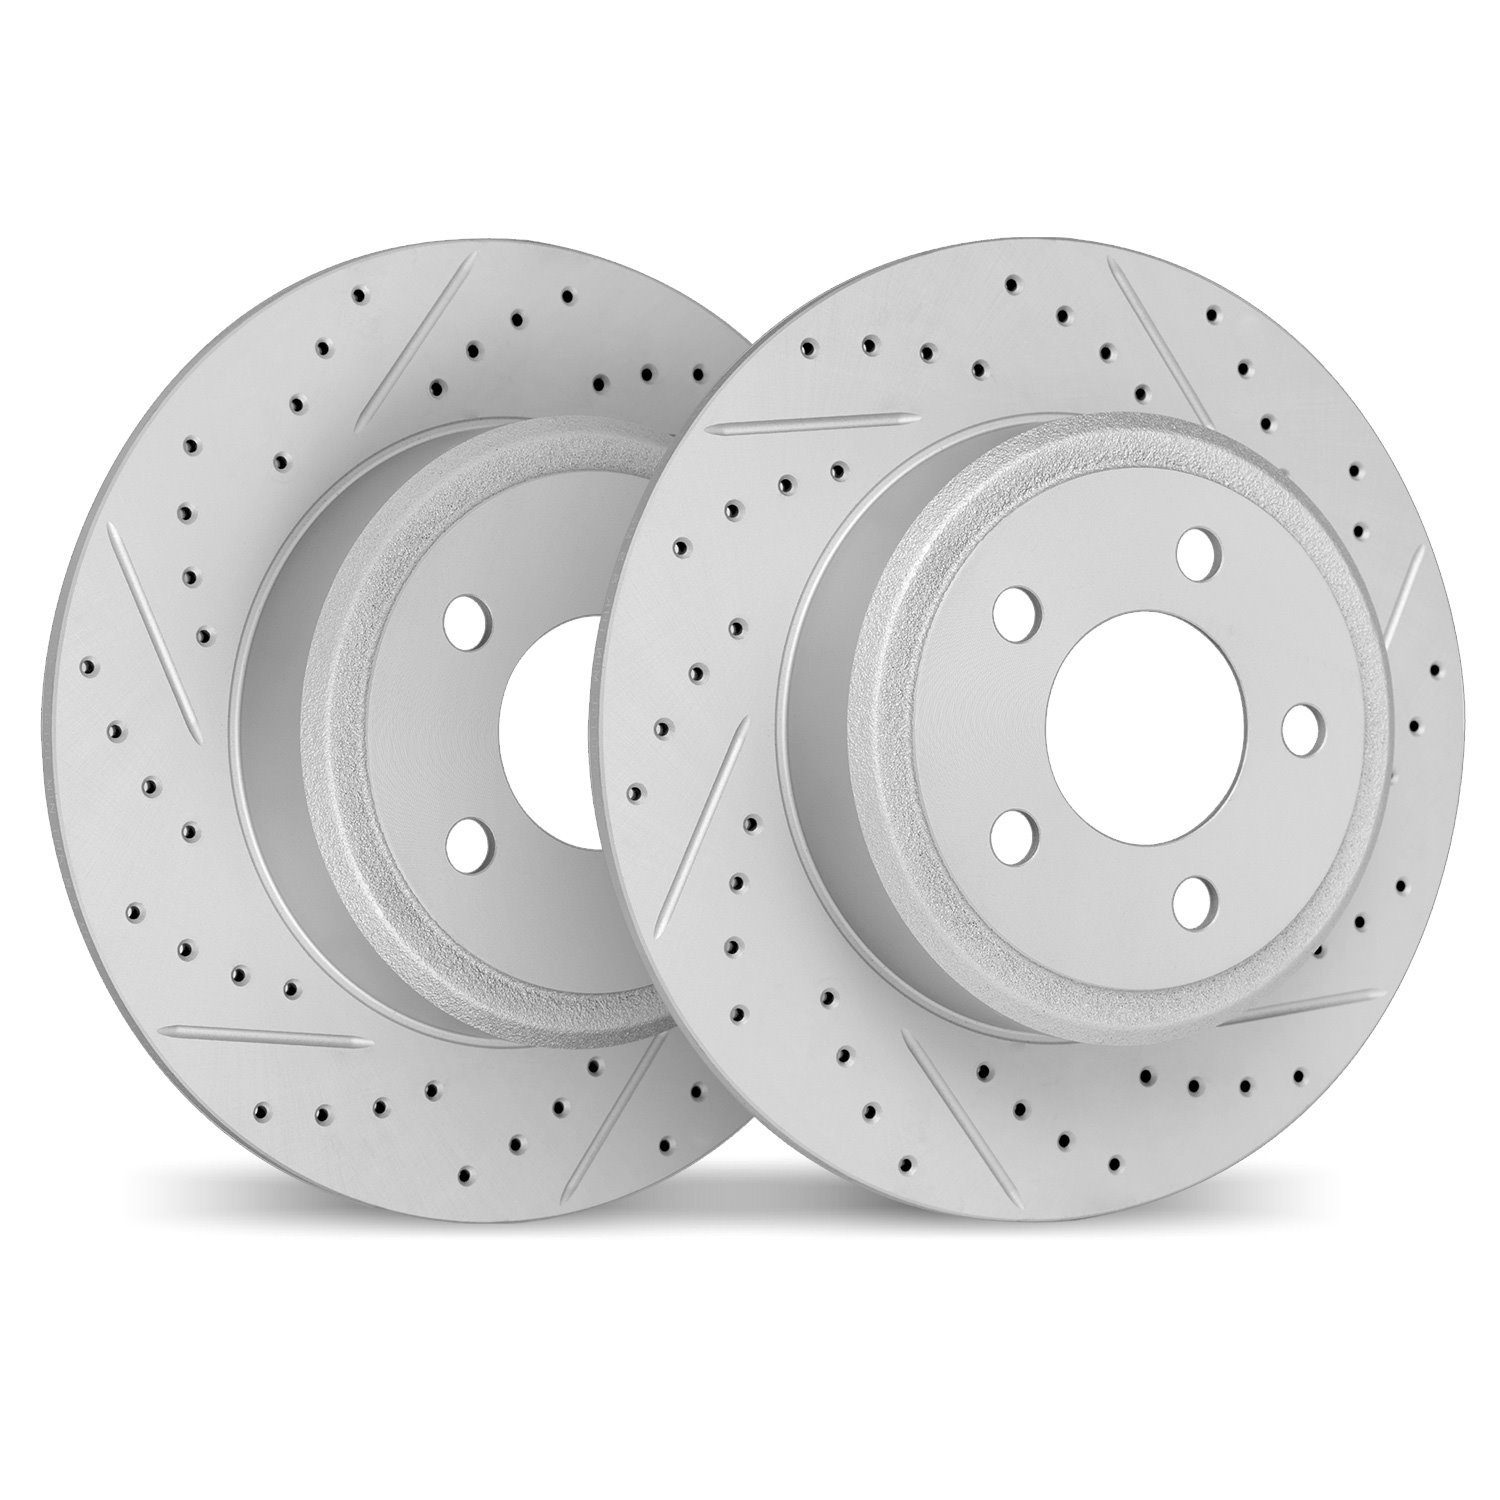 2002-67053 Geoperformance Drilled/Slotted Brake Rotors, Fits Select Infiniti/Nissan, Position: Rear